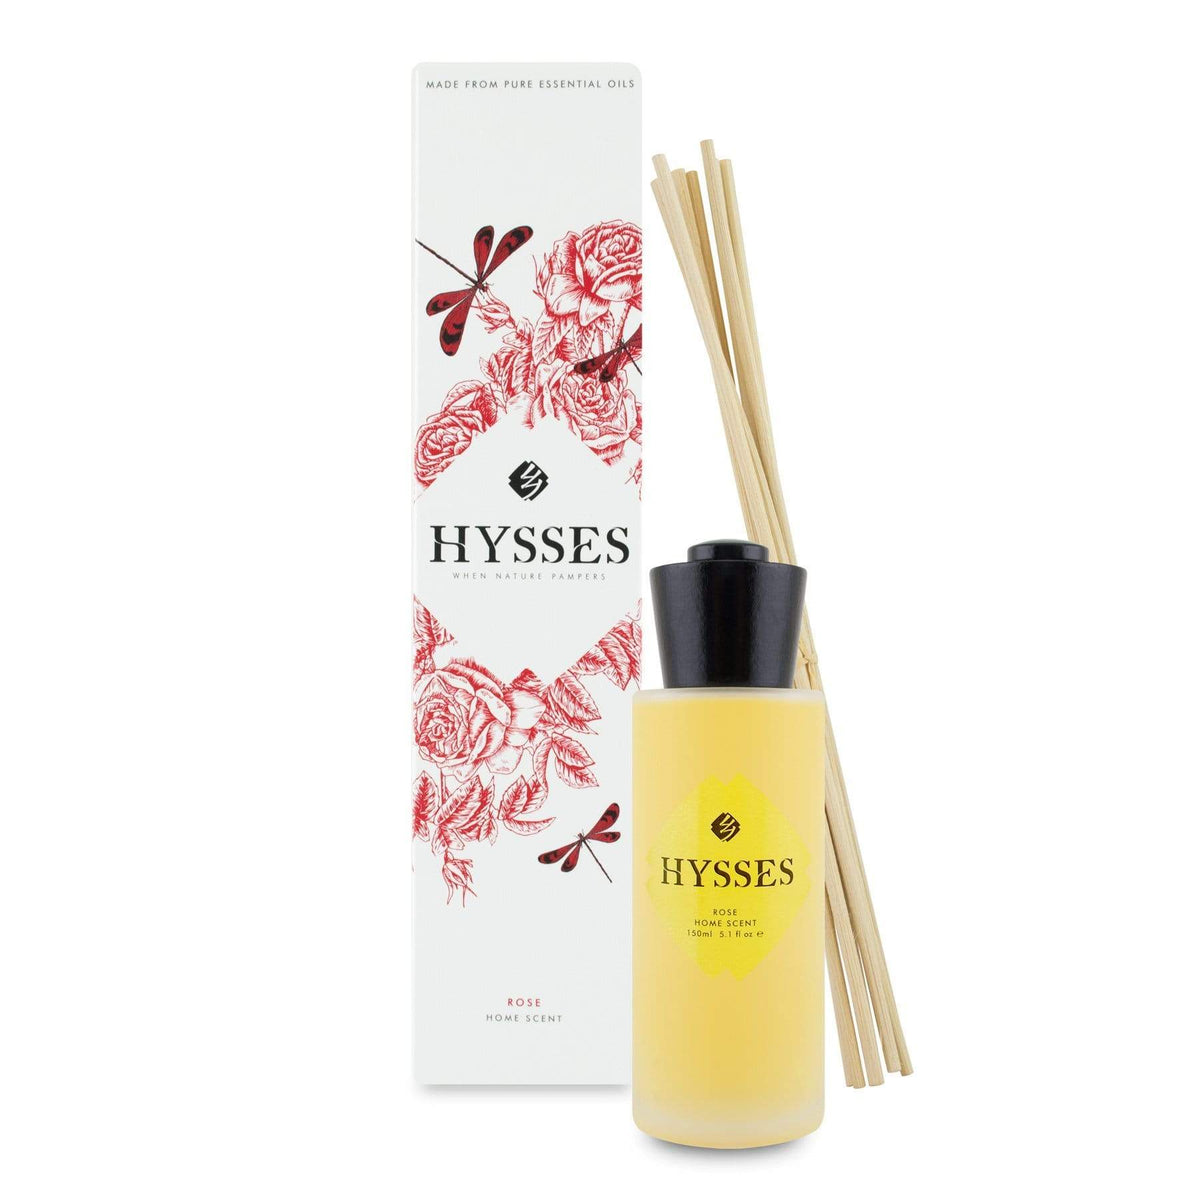 Hysses Home Scents 150ml Home Scent Reed Diffuser Rose Geranium